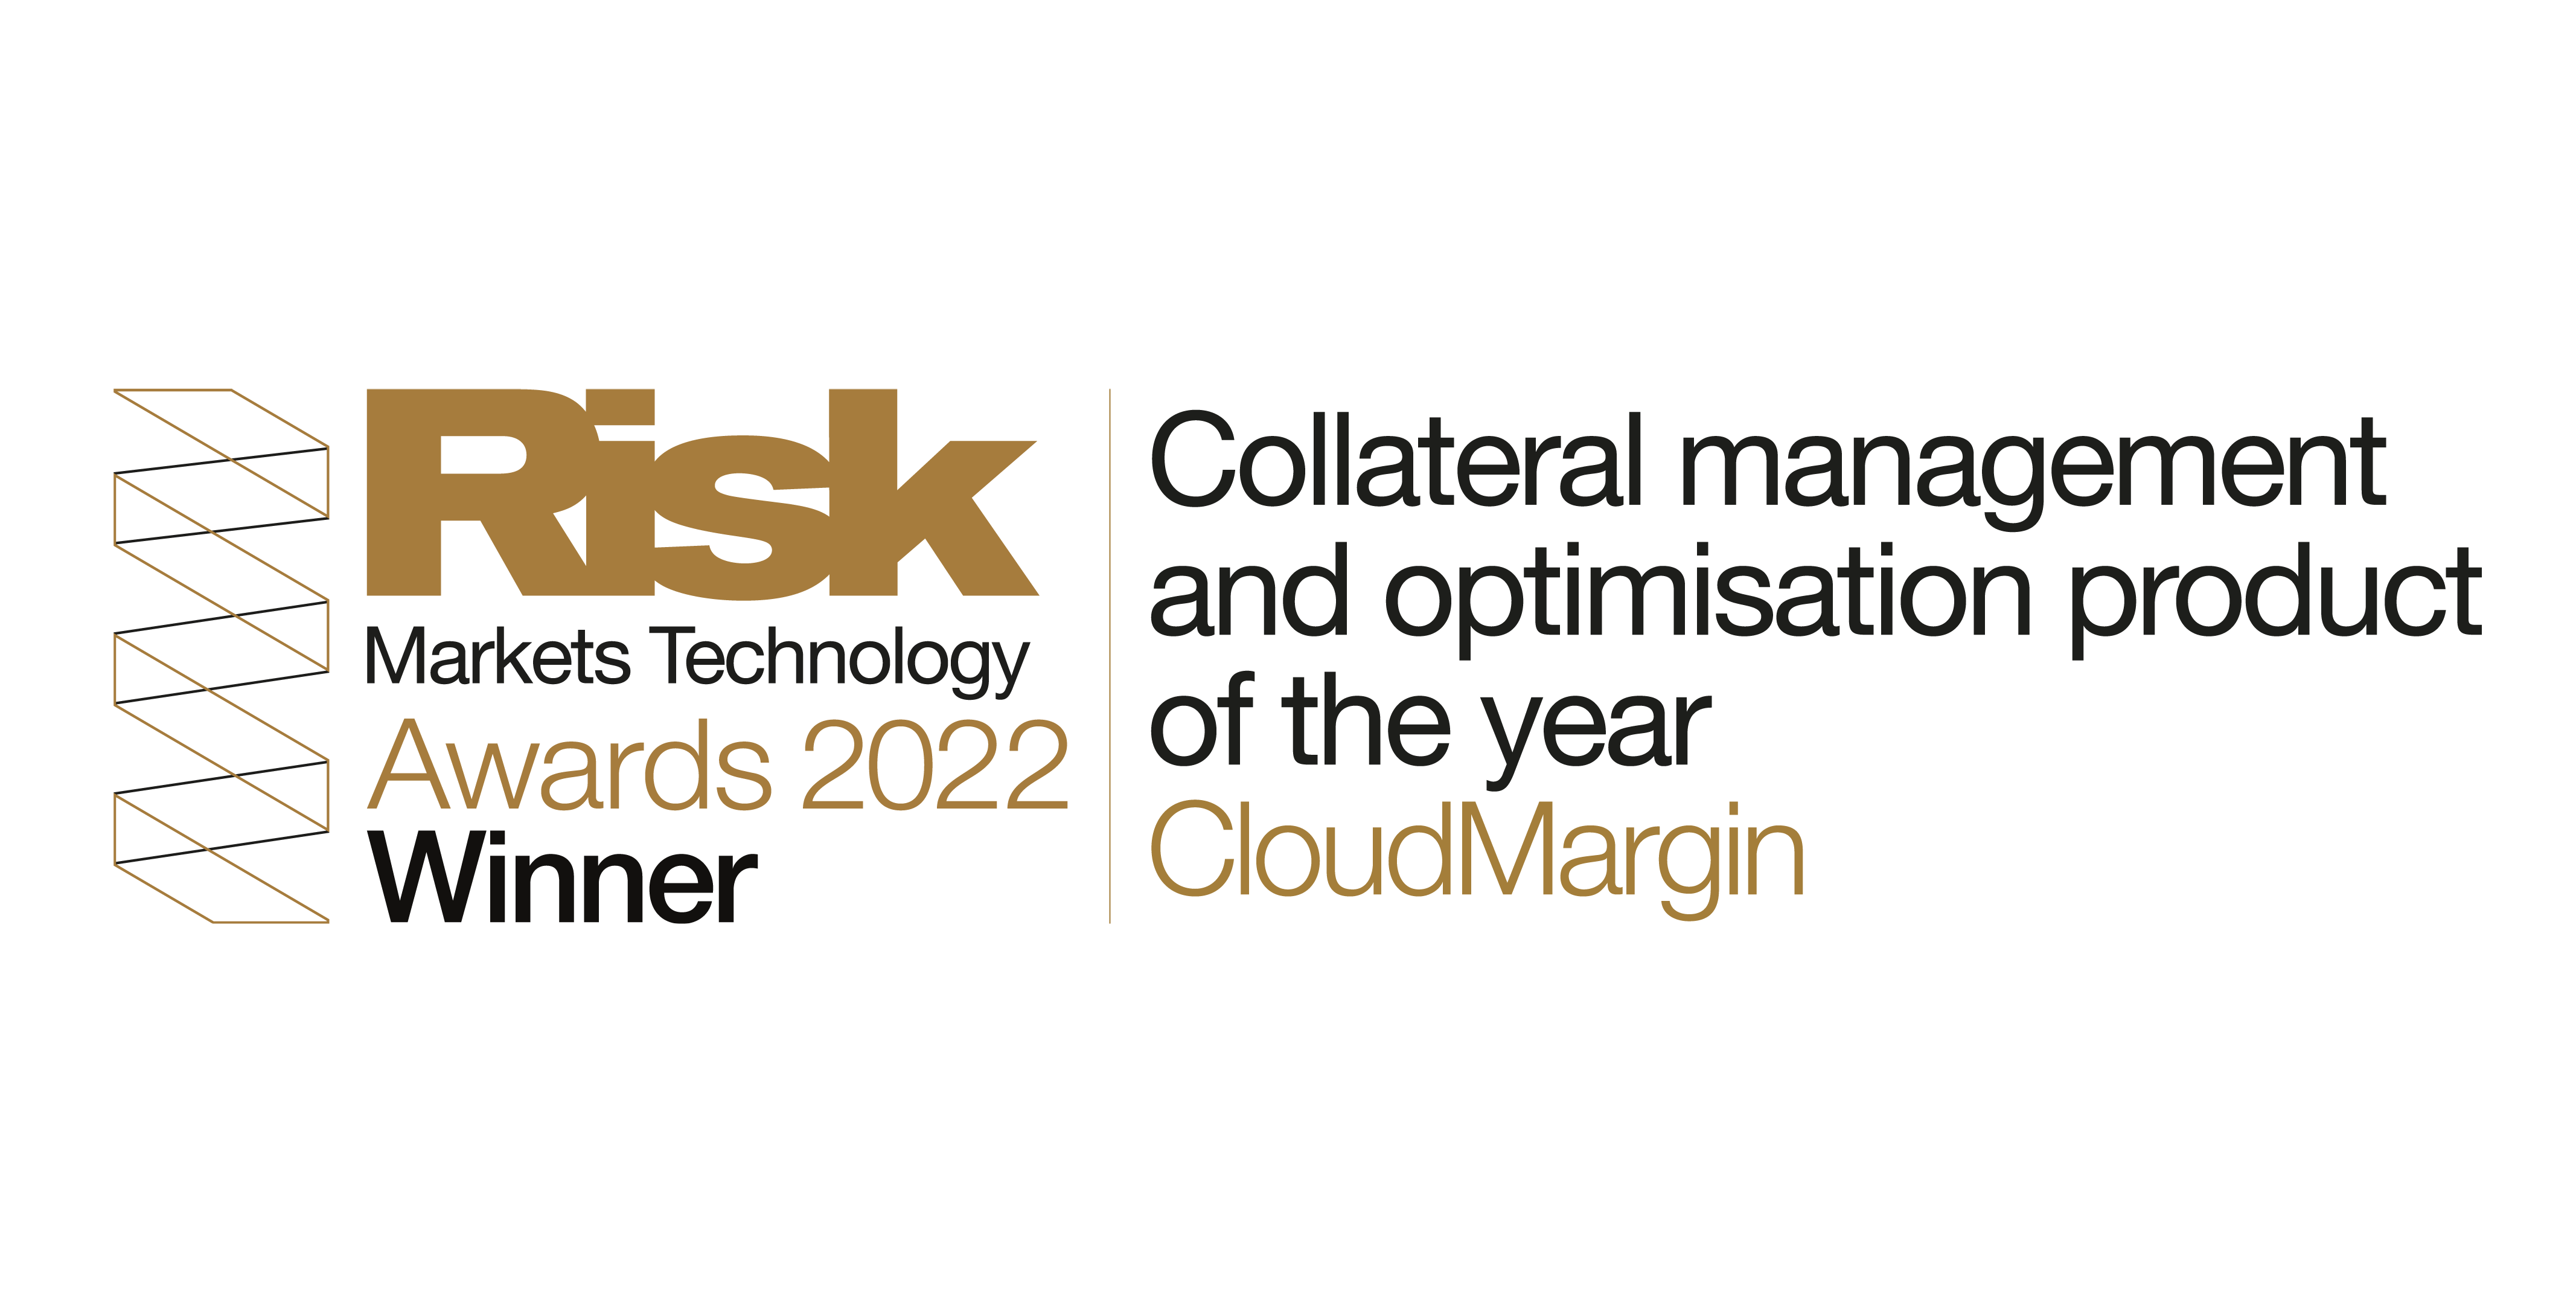 Cloudmargin Named Collateral Management And Optimisation Product Of The Year In 2022 Risk